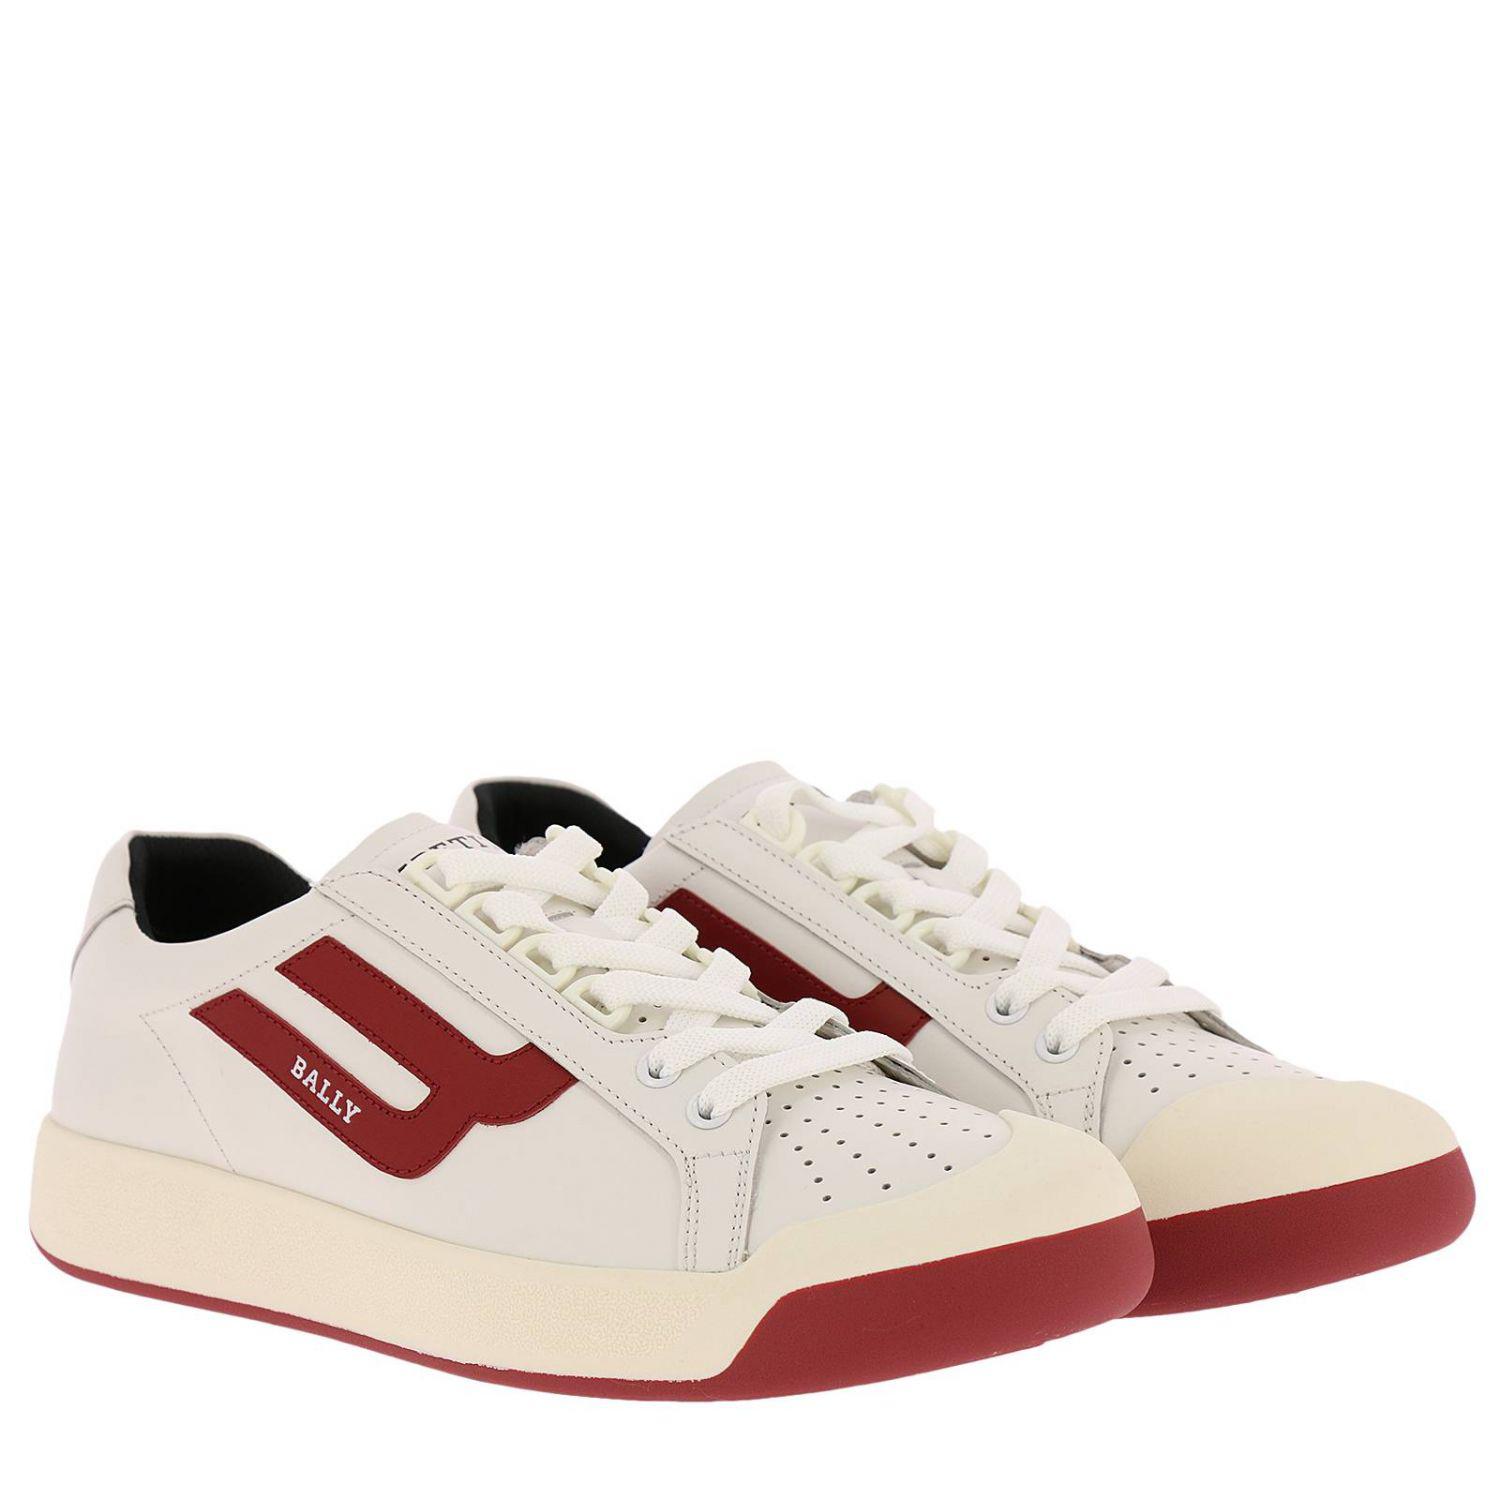 Bally Leather Men's New Competition Retro Low-top Sneakers, Red/white ...